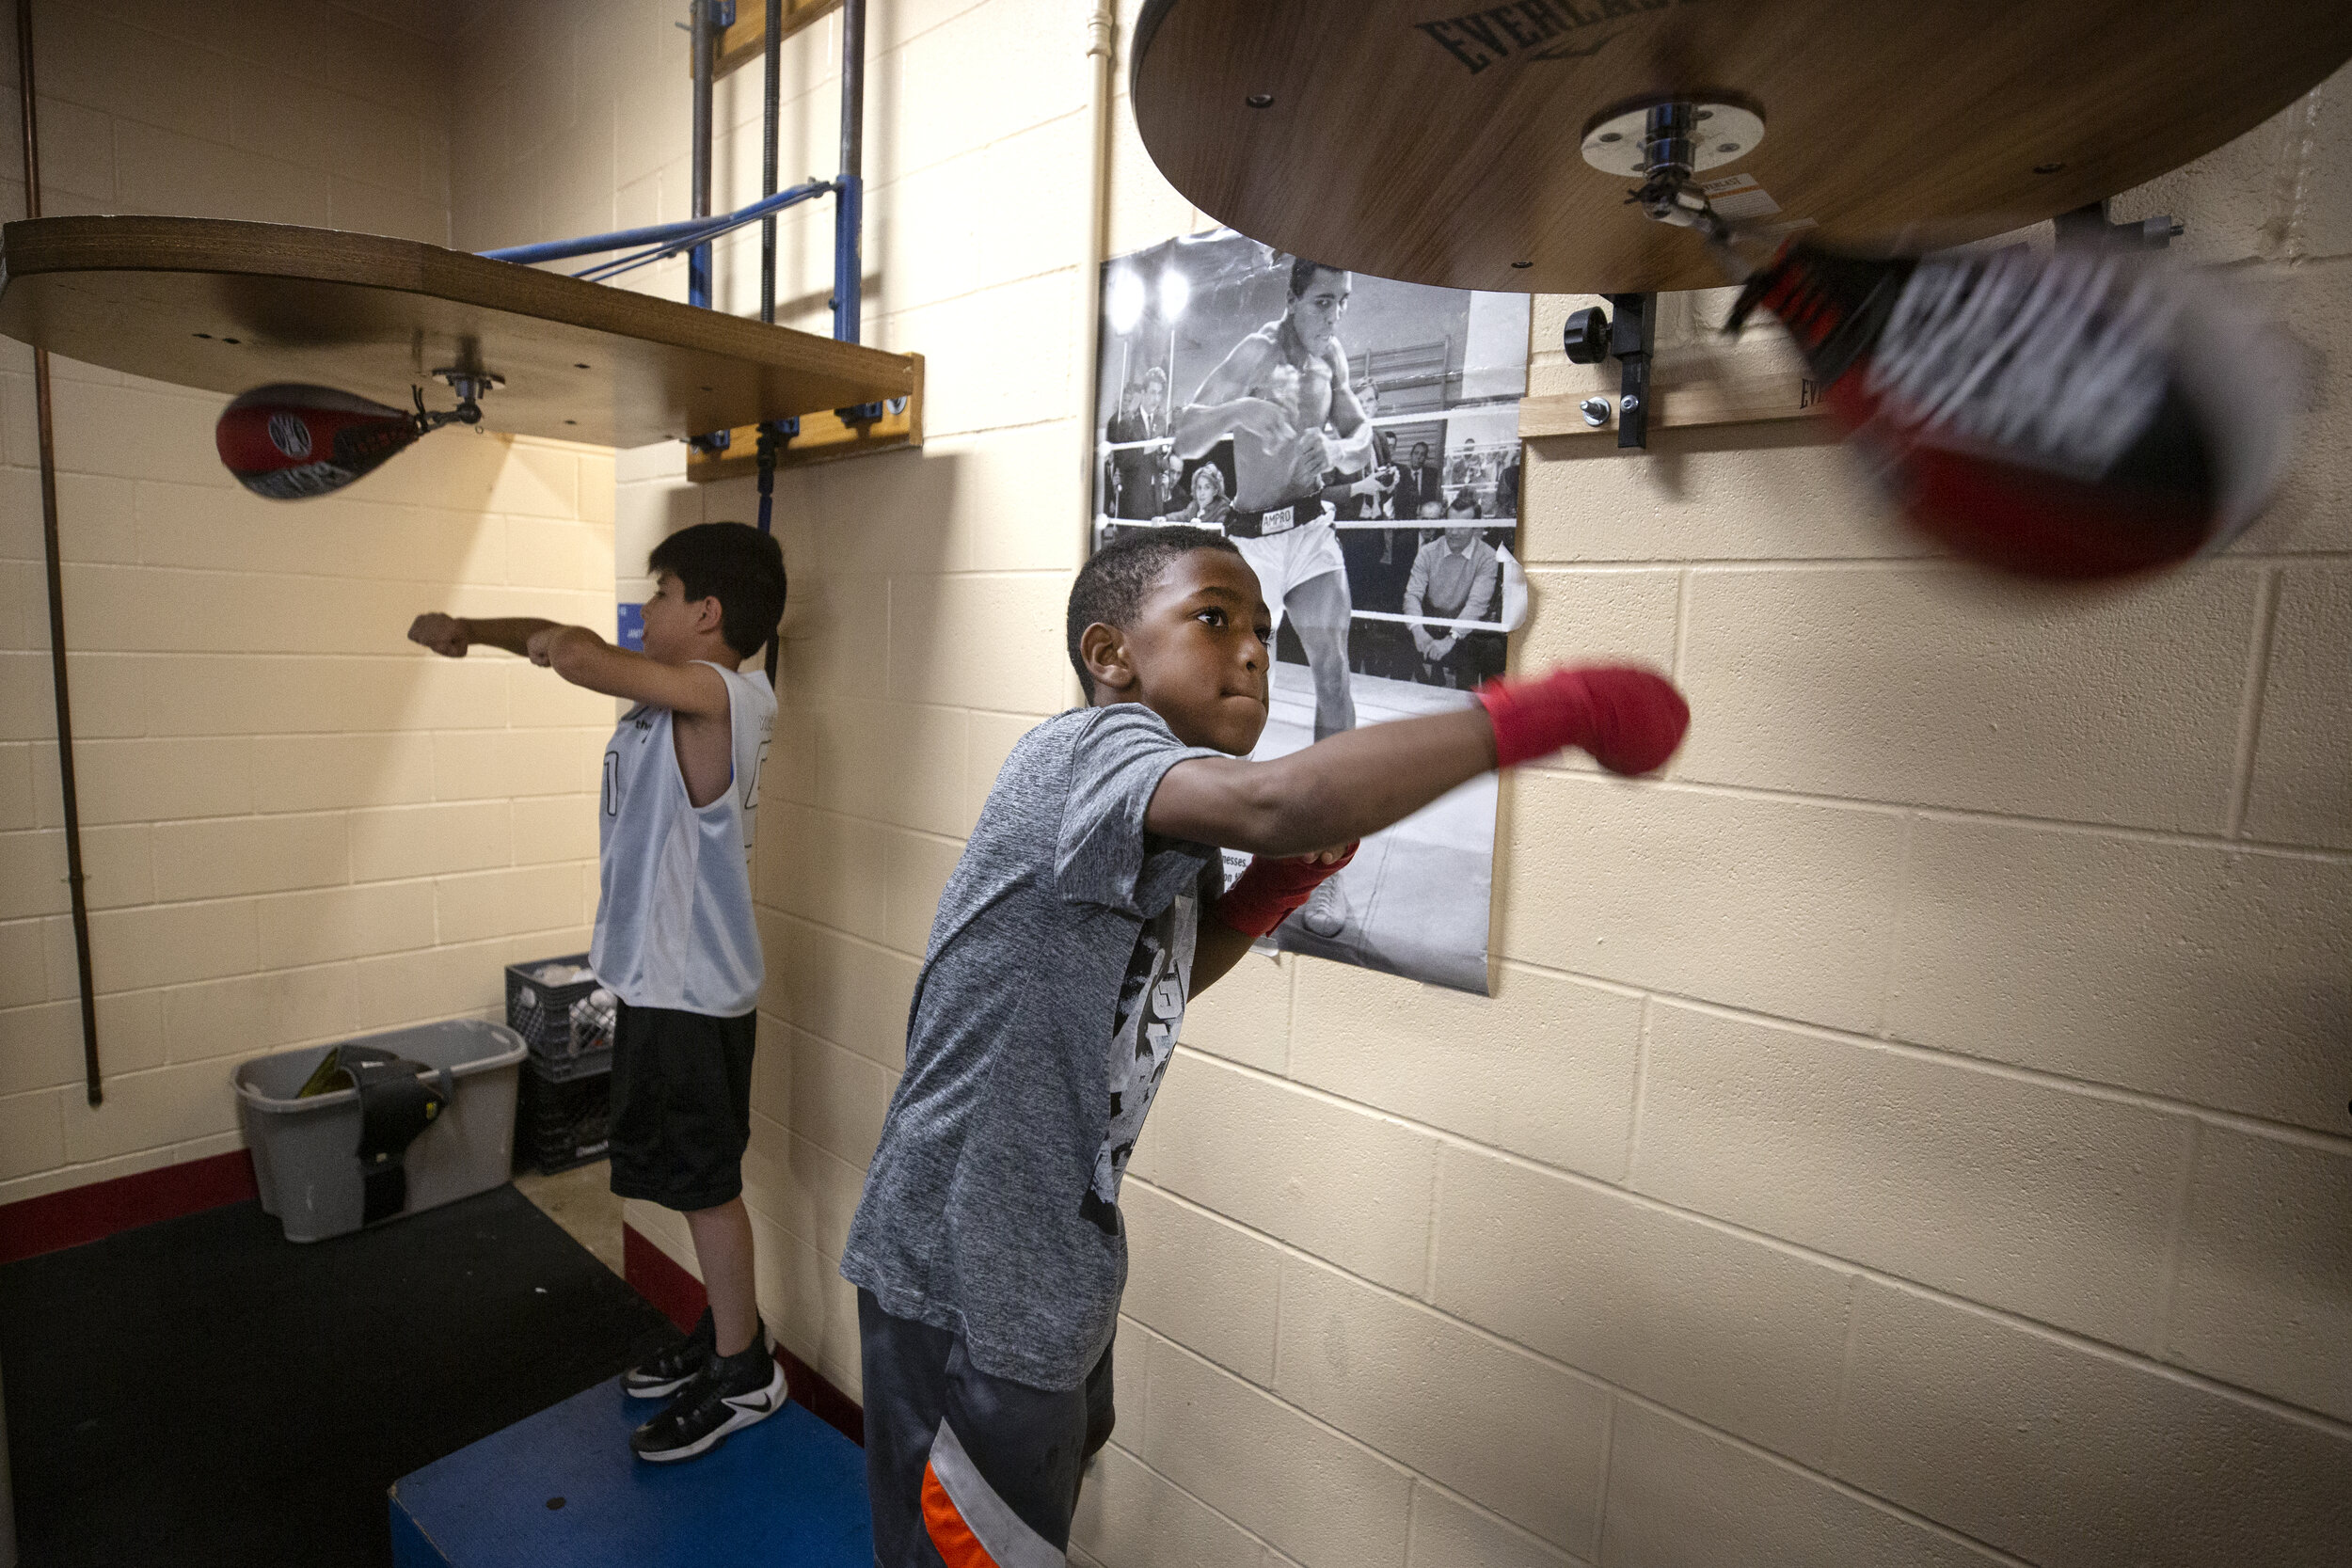  AUSTIN, TX. Young boxers at the Pan AM Recreation Center train for an upcoming competition. The rec center, centered in East Austin, has been a staple for boxing and community for decades. Now, with the East side’s rapid development, the center offe